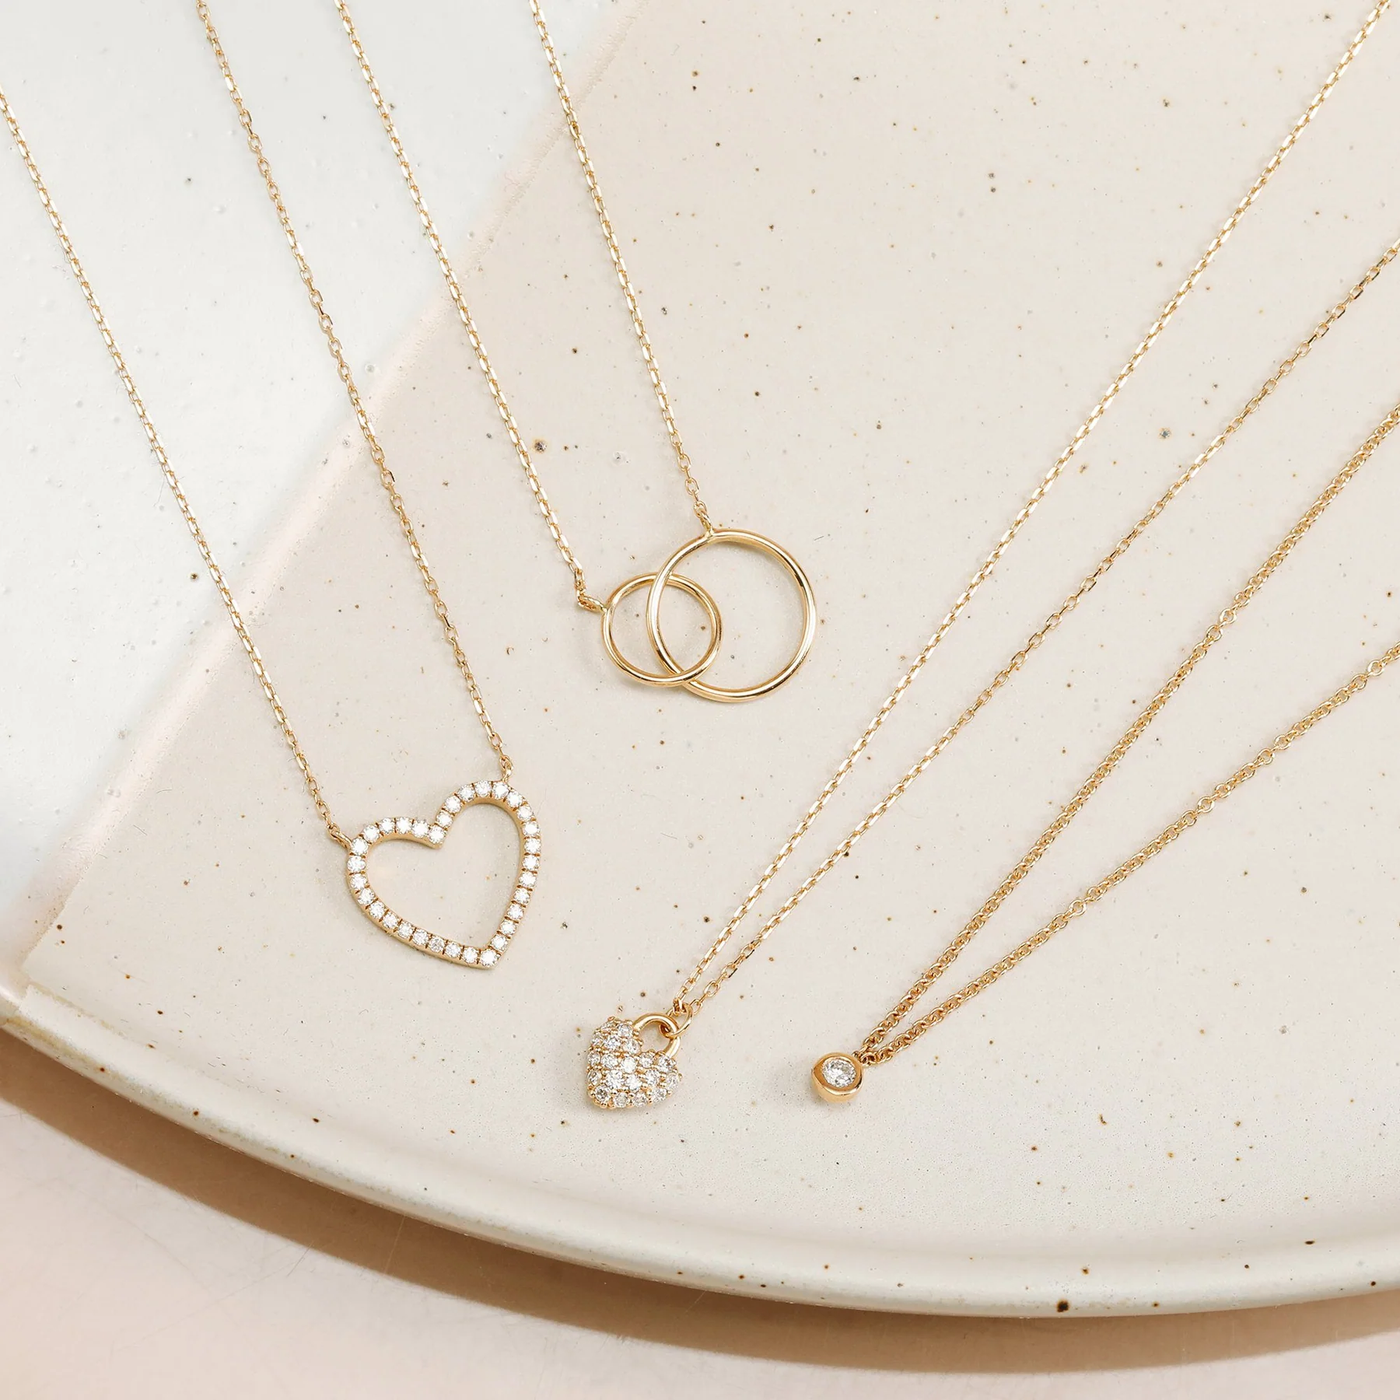 HELEN | Interlinked Circles Necklace